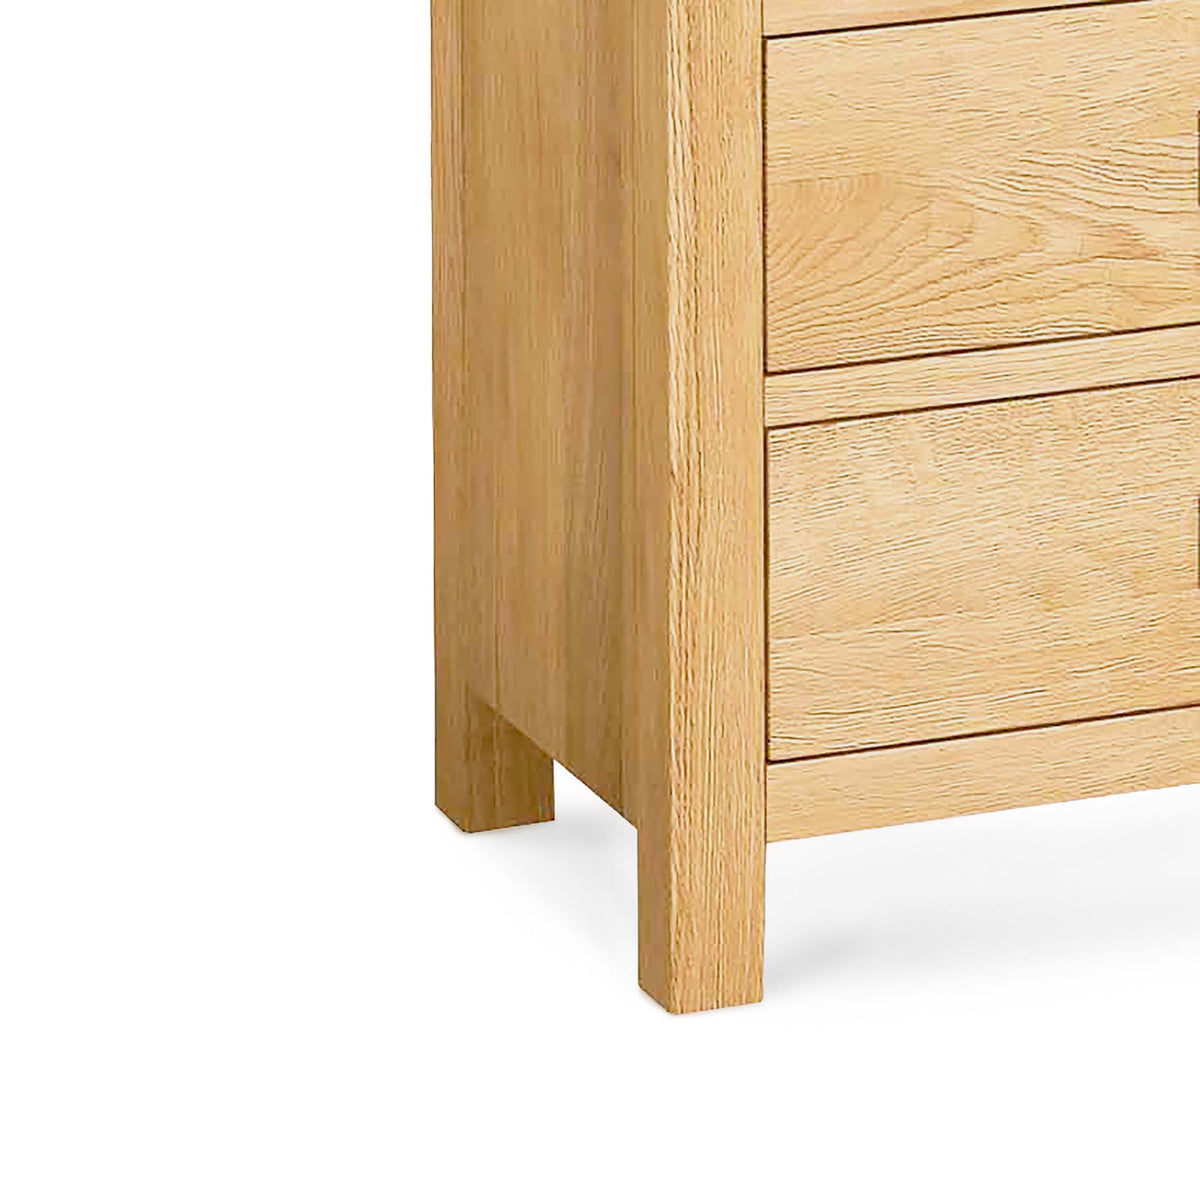 Surrey Oak waxed 5 drawer wide chest - Close Up of Feet